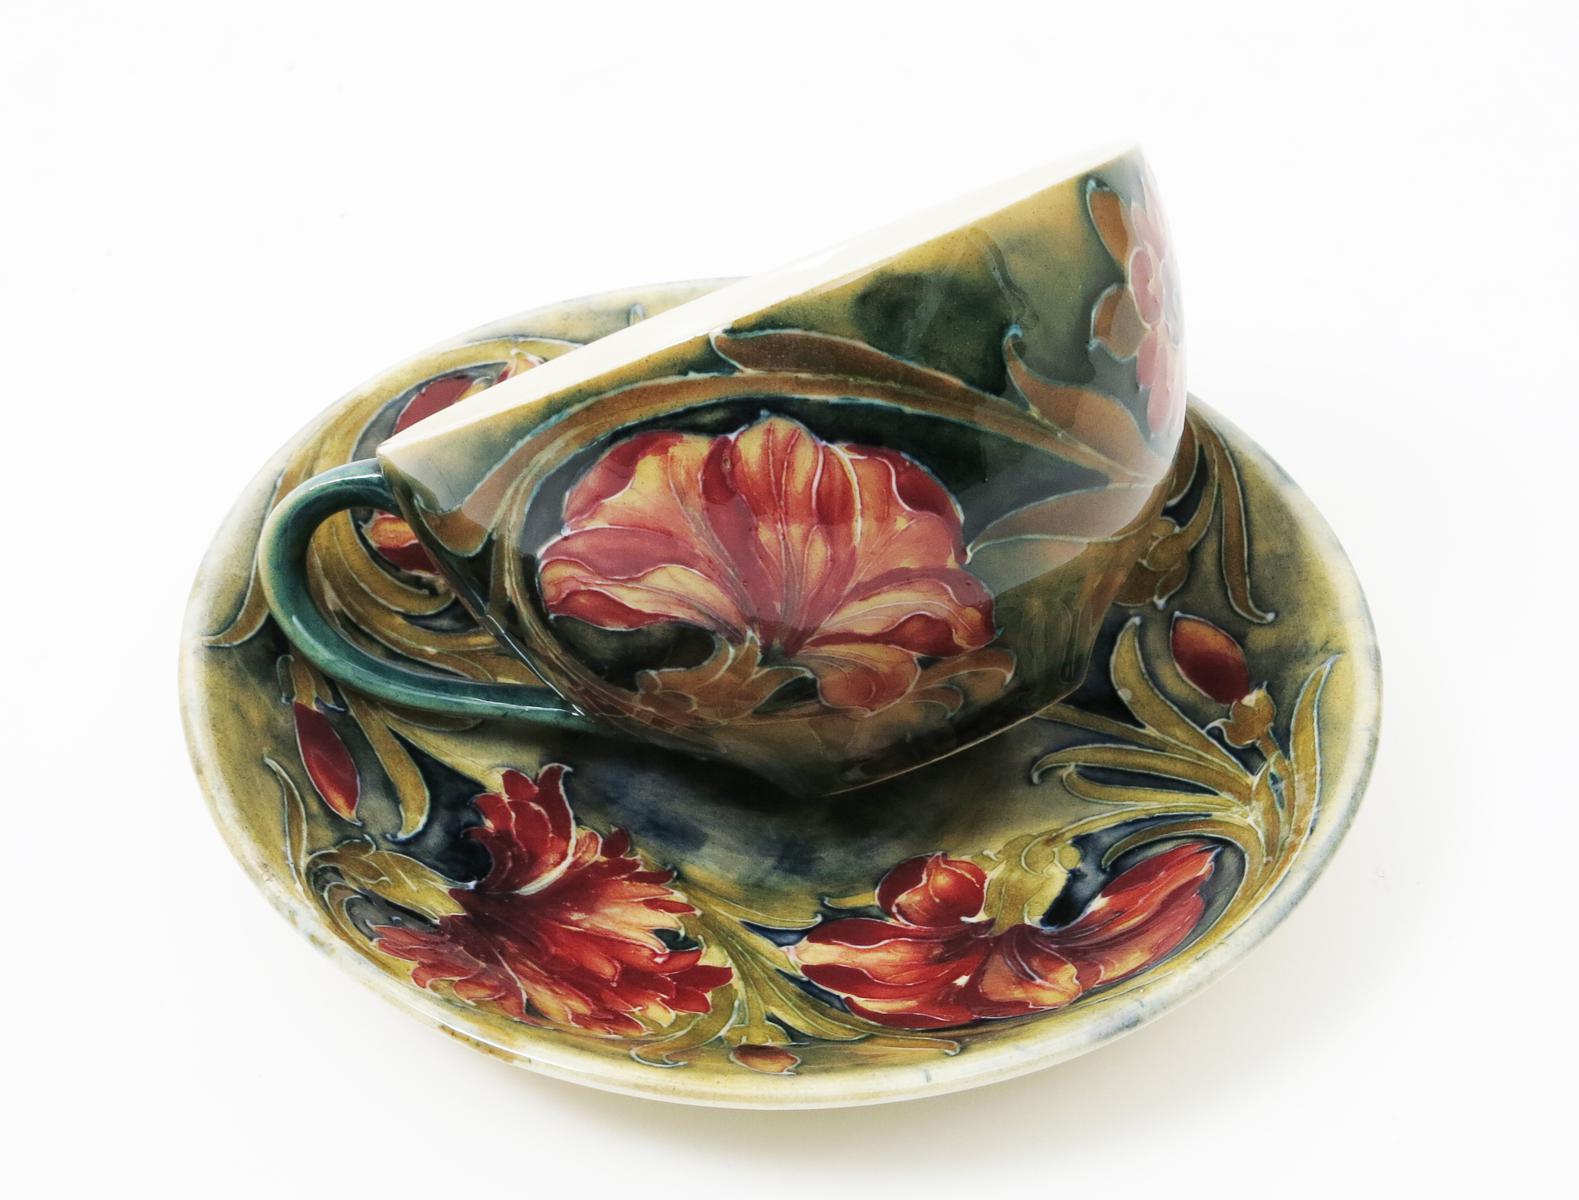 `Spanish` A Moorcroft cup and saucer designed by William Moorcroft, painted in shades of pink,